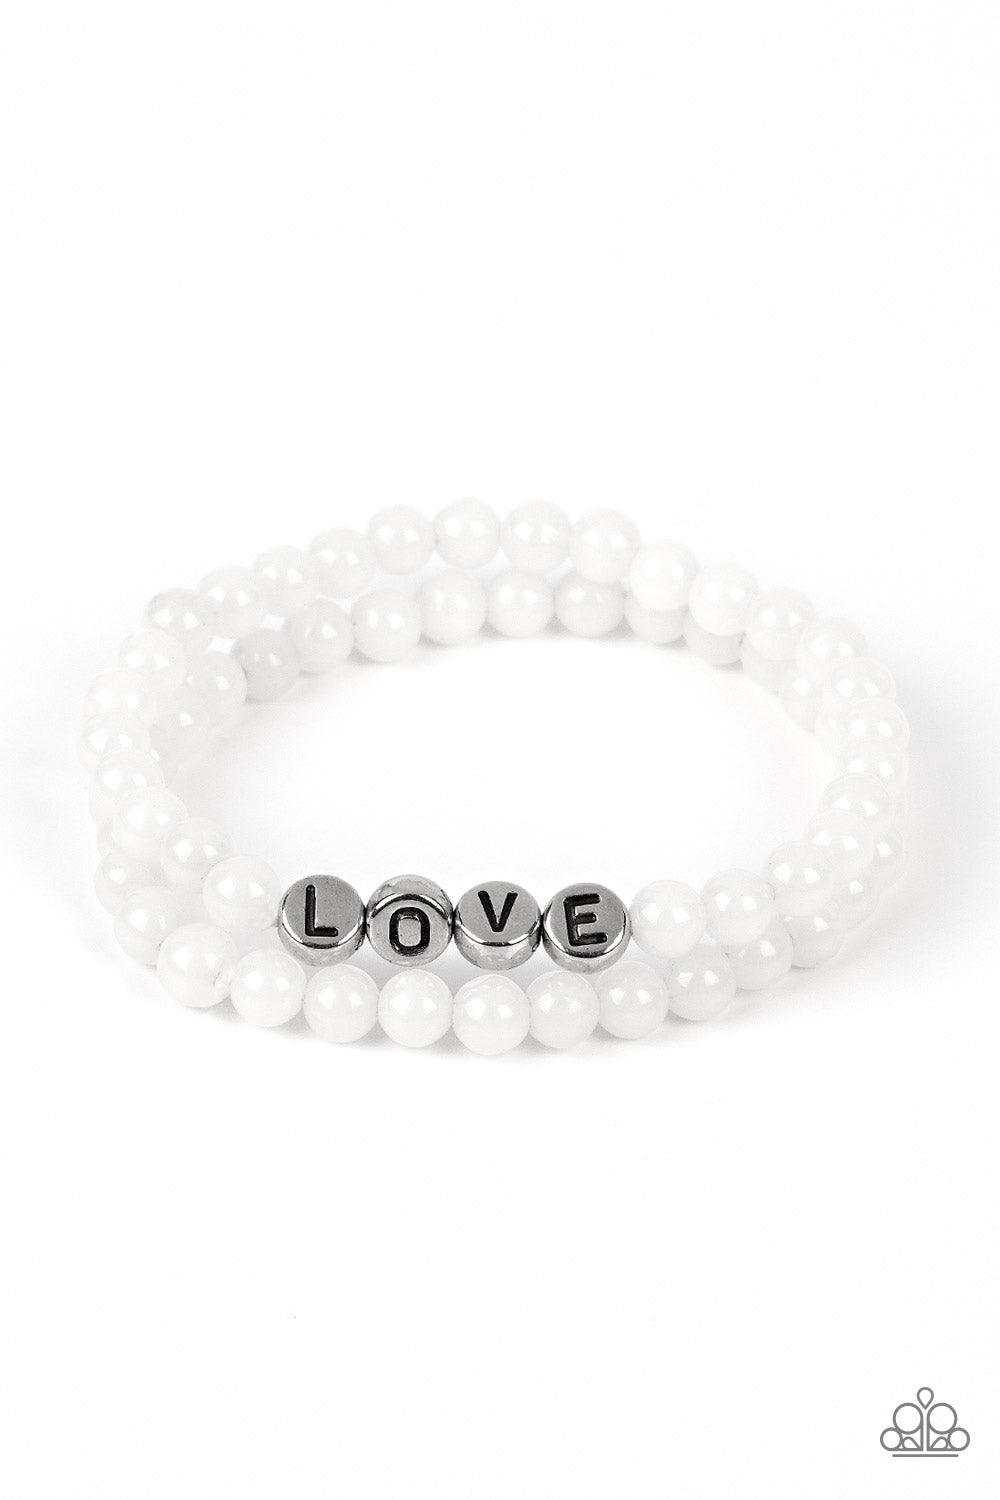 Devoted Dreamer - White and Silver Bracelet - Paparazzi Accessories - Cloudy beads in subtle shades of white extend around the wrist on elastic stretchy bands for a two-for-one romantic stack. Centered on one of the white bracelets, silver discs stamped with individual black letters spell out the word "love." Sold as one individual bracelet.